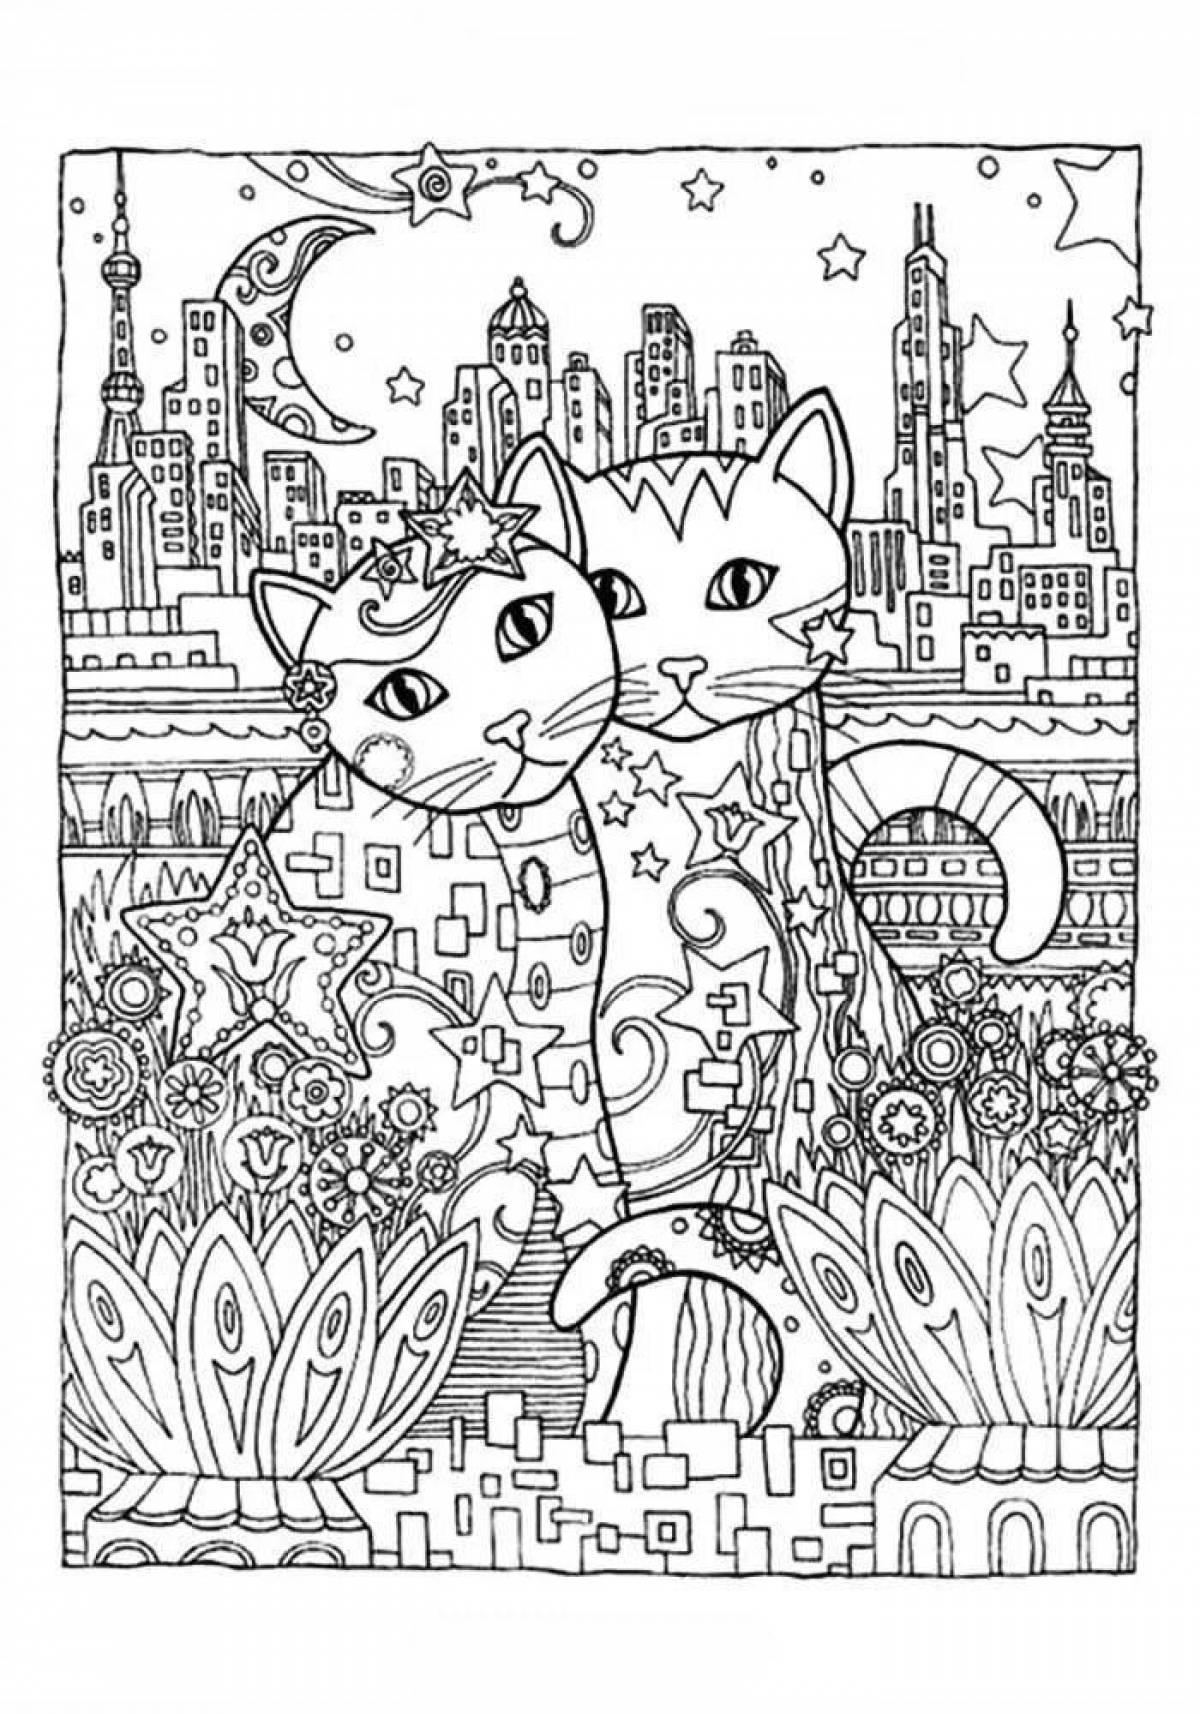 Serene coloring page complex cat